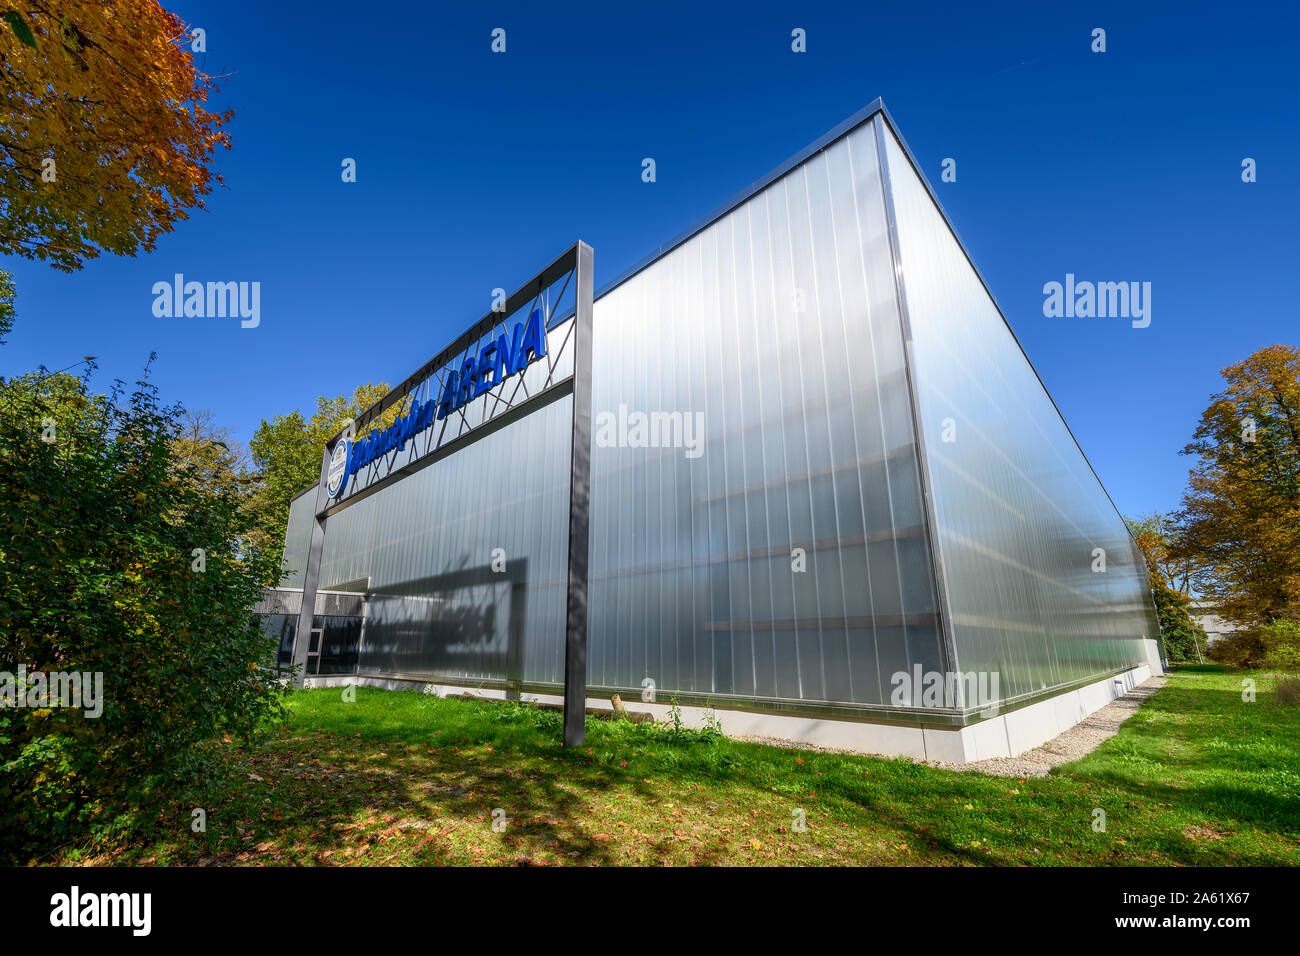 Freising, Germany - October 13. 2019 : Weihenstephan Arena - Ice Hall of the City of Freising - View from the outside Stock Photo